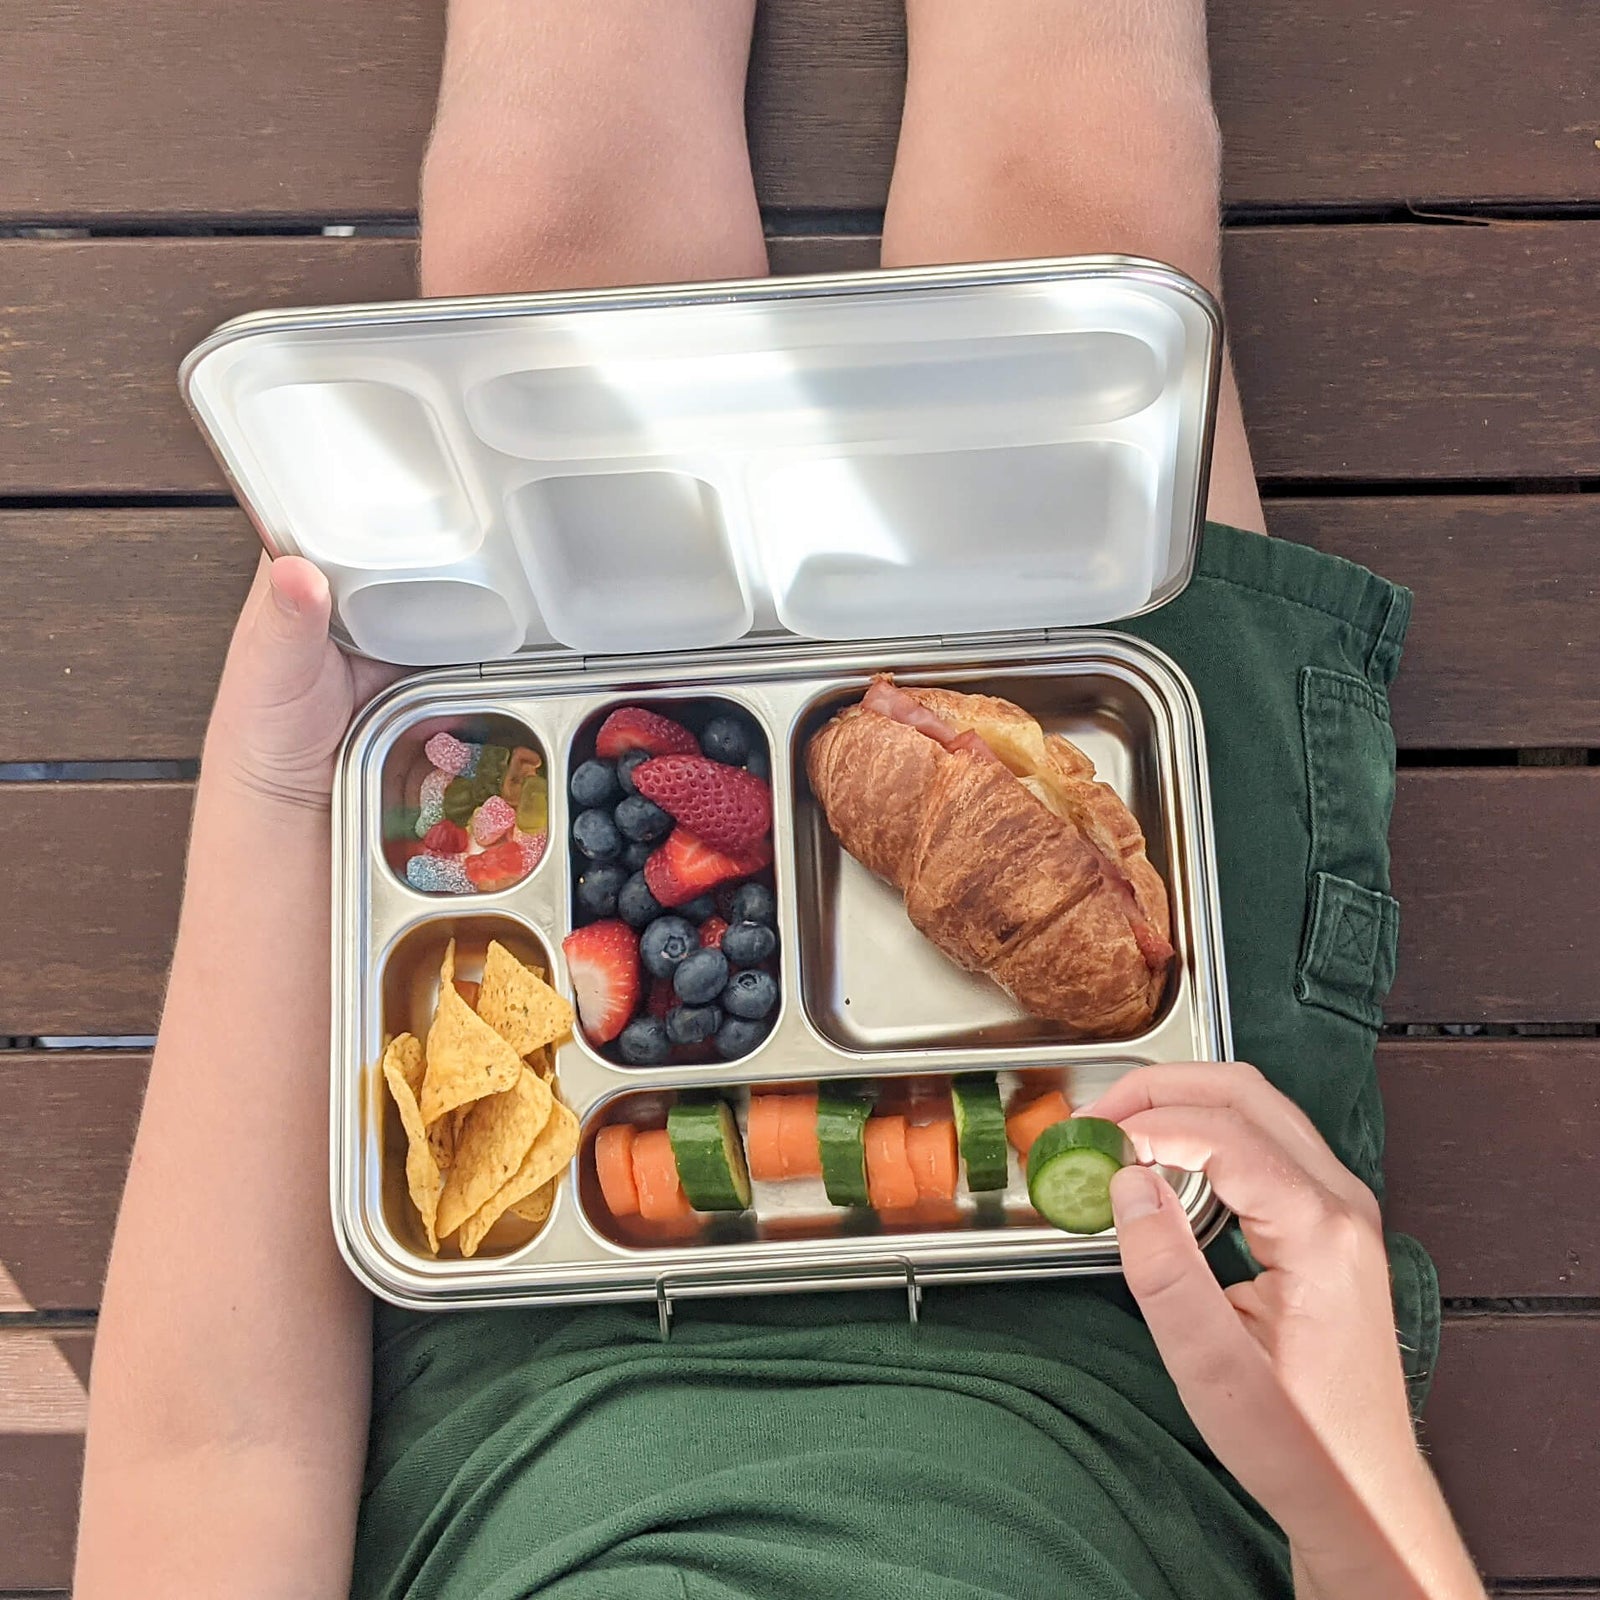 Best Stainless Steel Lunch Containers for Your Lunchbox - Get